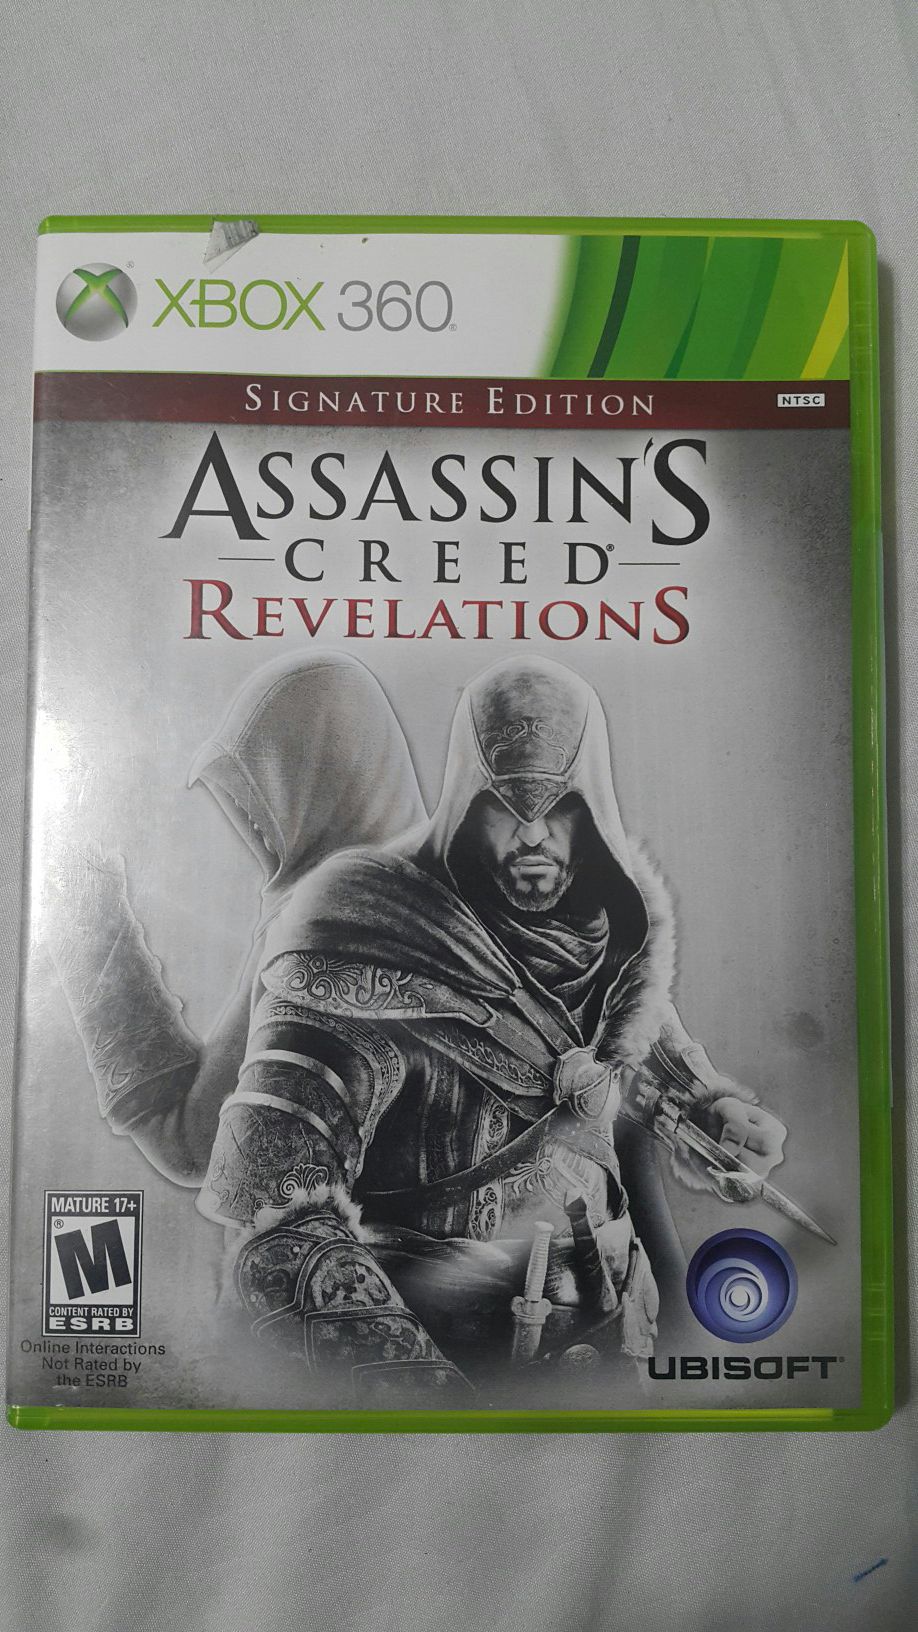 ASSASSINS CREED RELEVATIONS FOR XBOX 360 (#1)